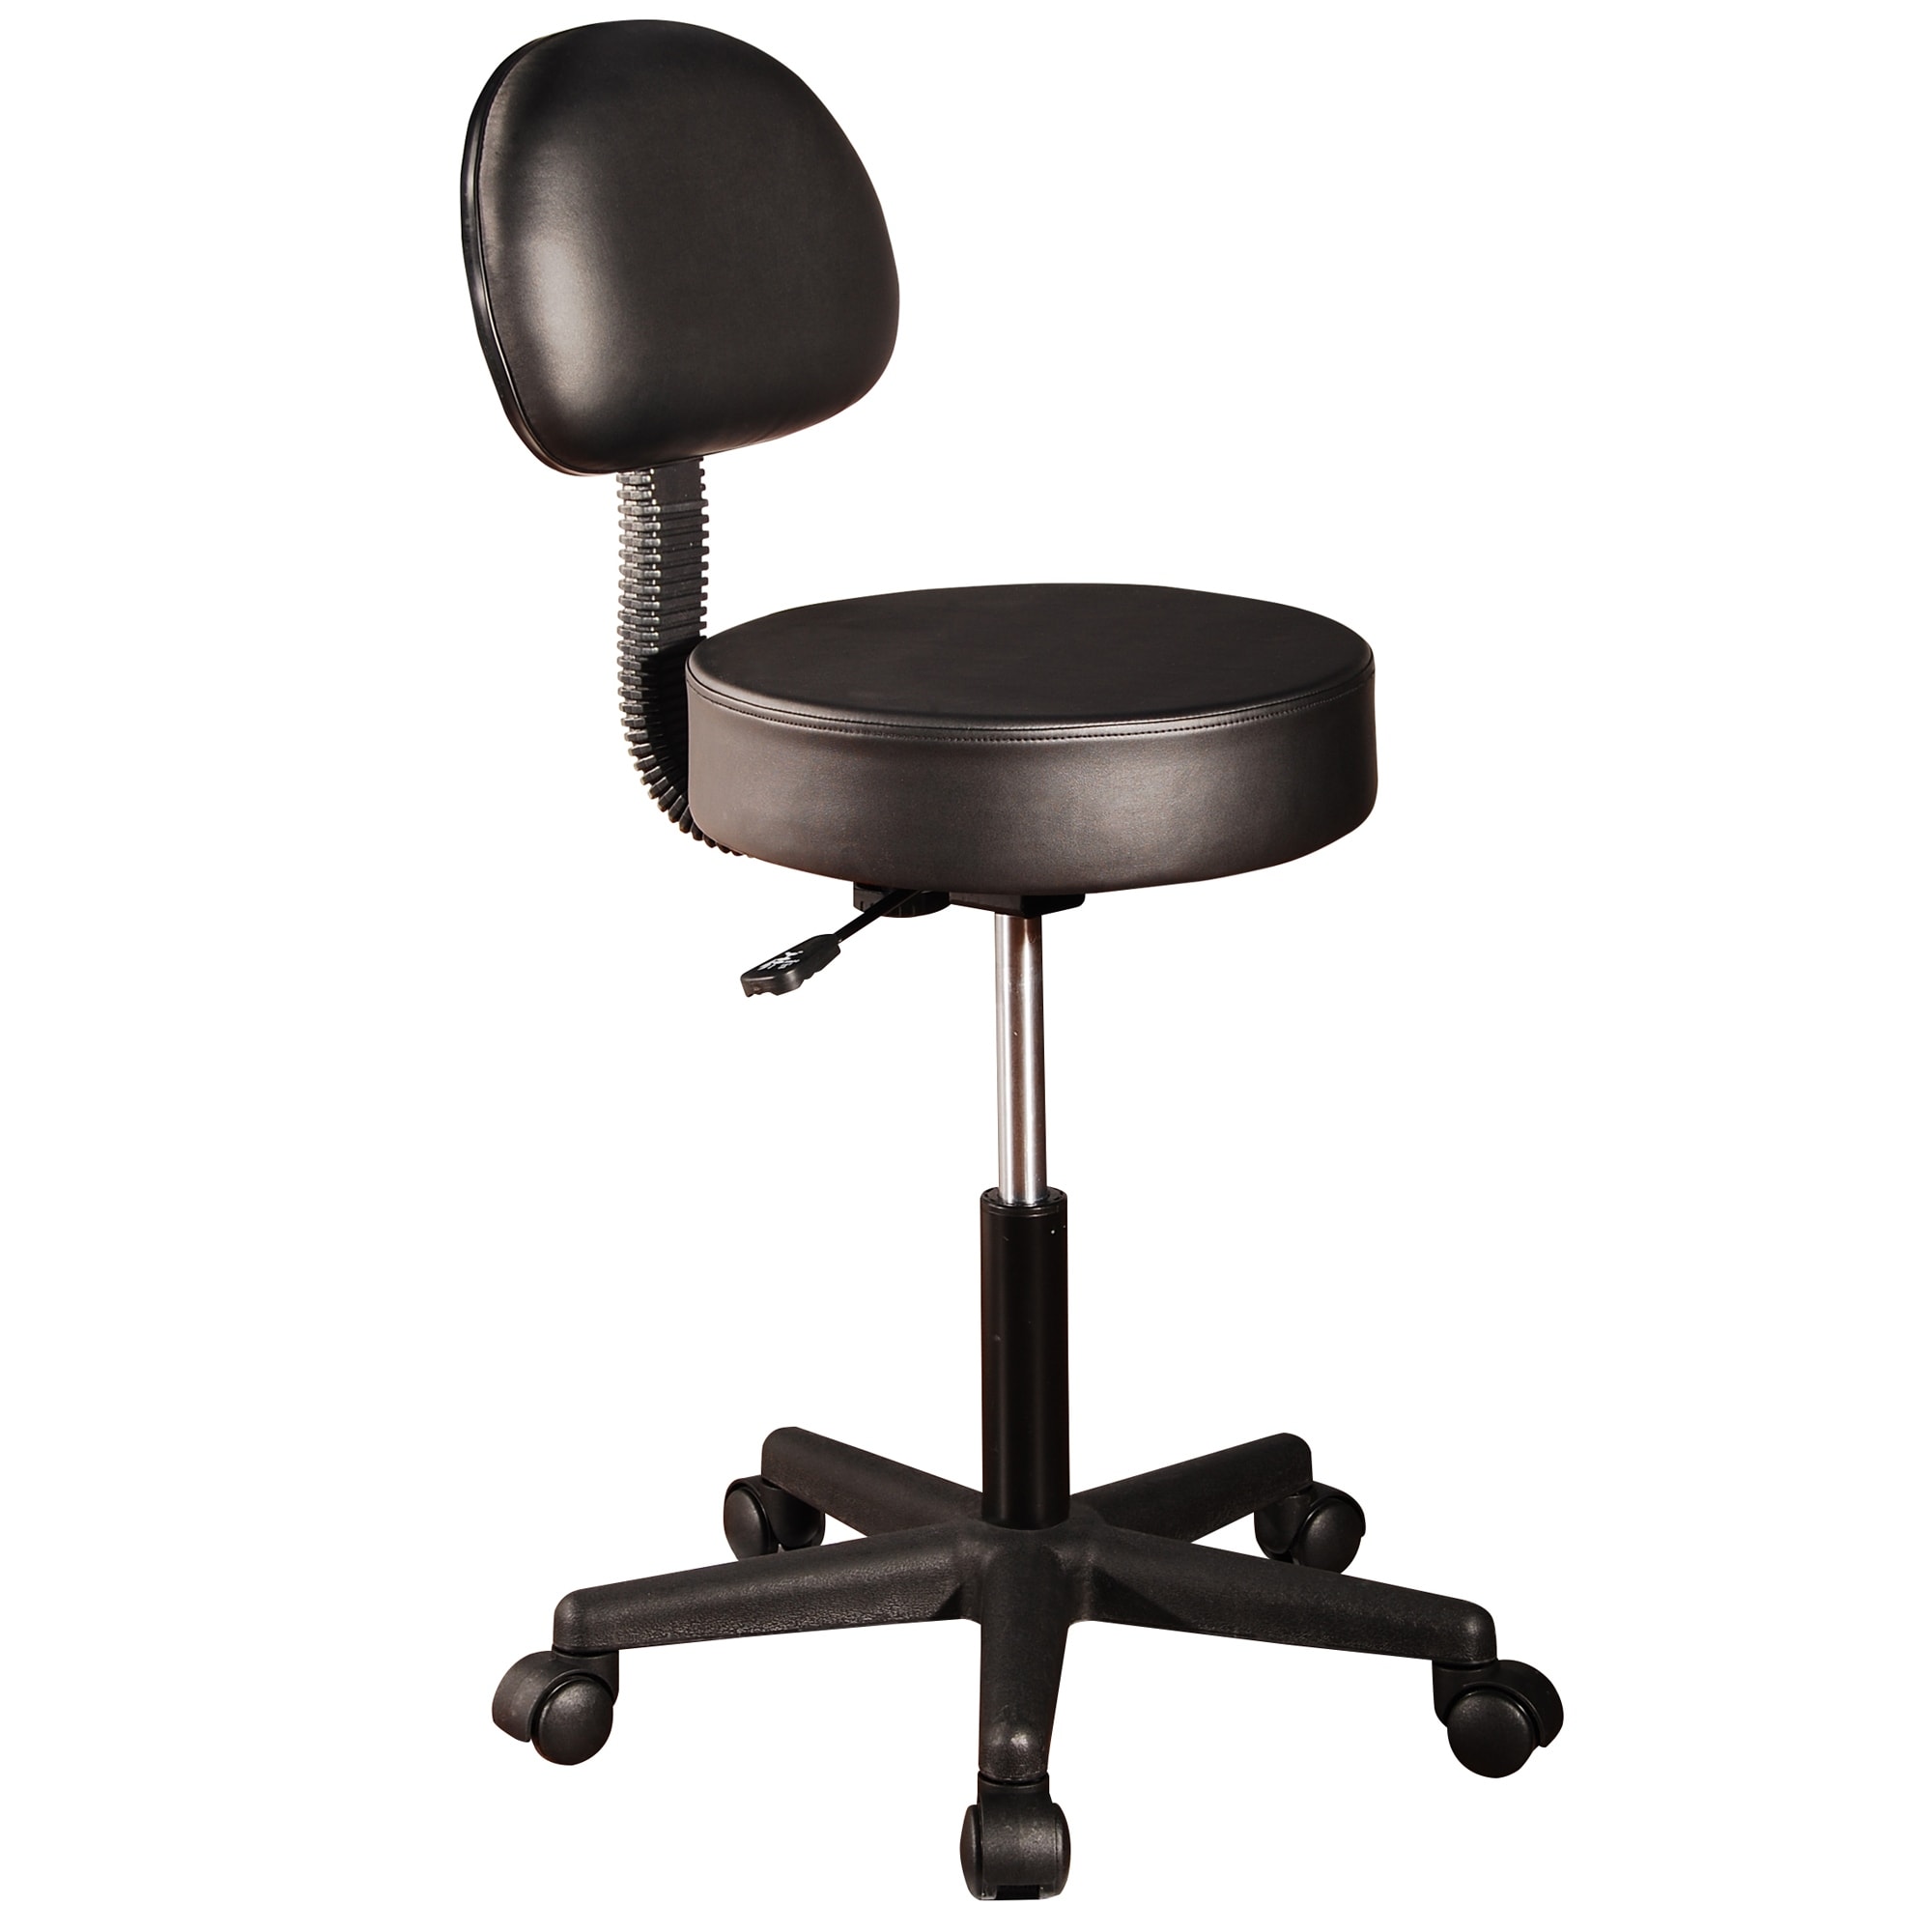 File Cabinets Armchair Smooth-Rolling Dual-Wheels Salon Chair Comfortable Cushion and Backrest Hydraulic Chair Stool Chair